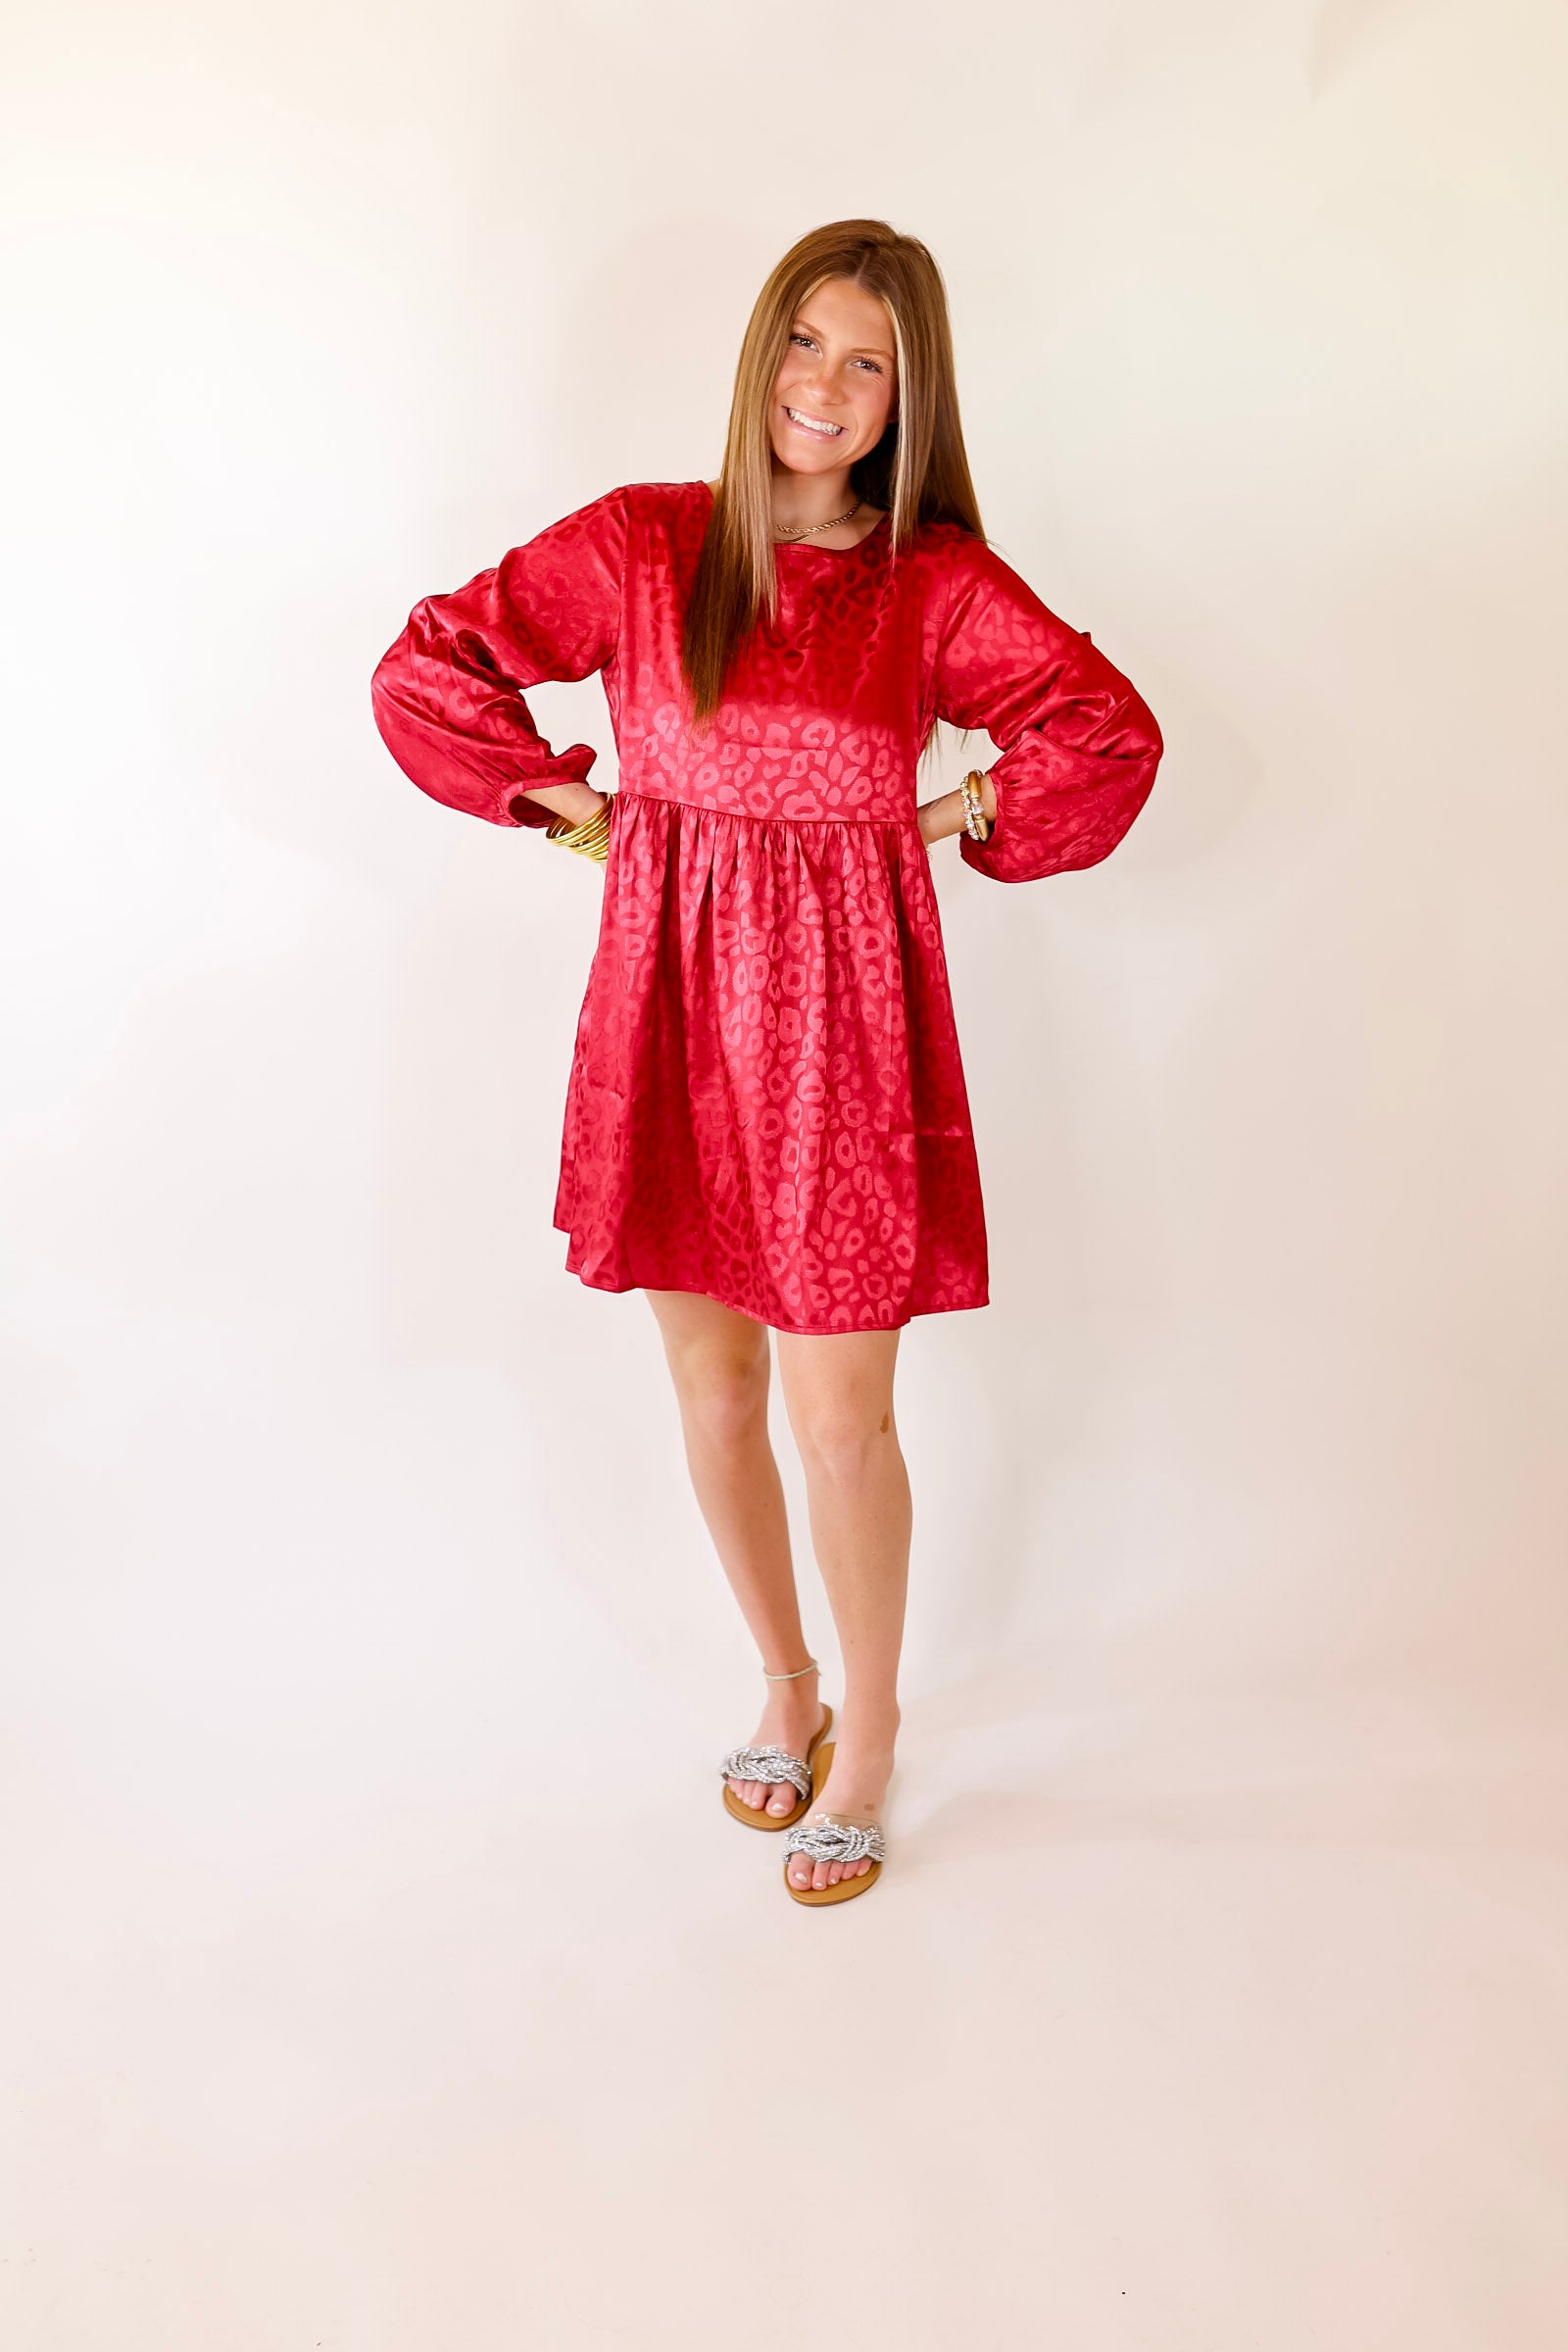 Change Is Coming Leopard Print Babydoll Dress with Long Sleeves in Dark Red - Giddy Up Glamour Boutique